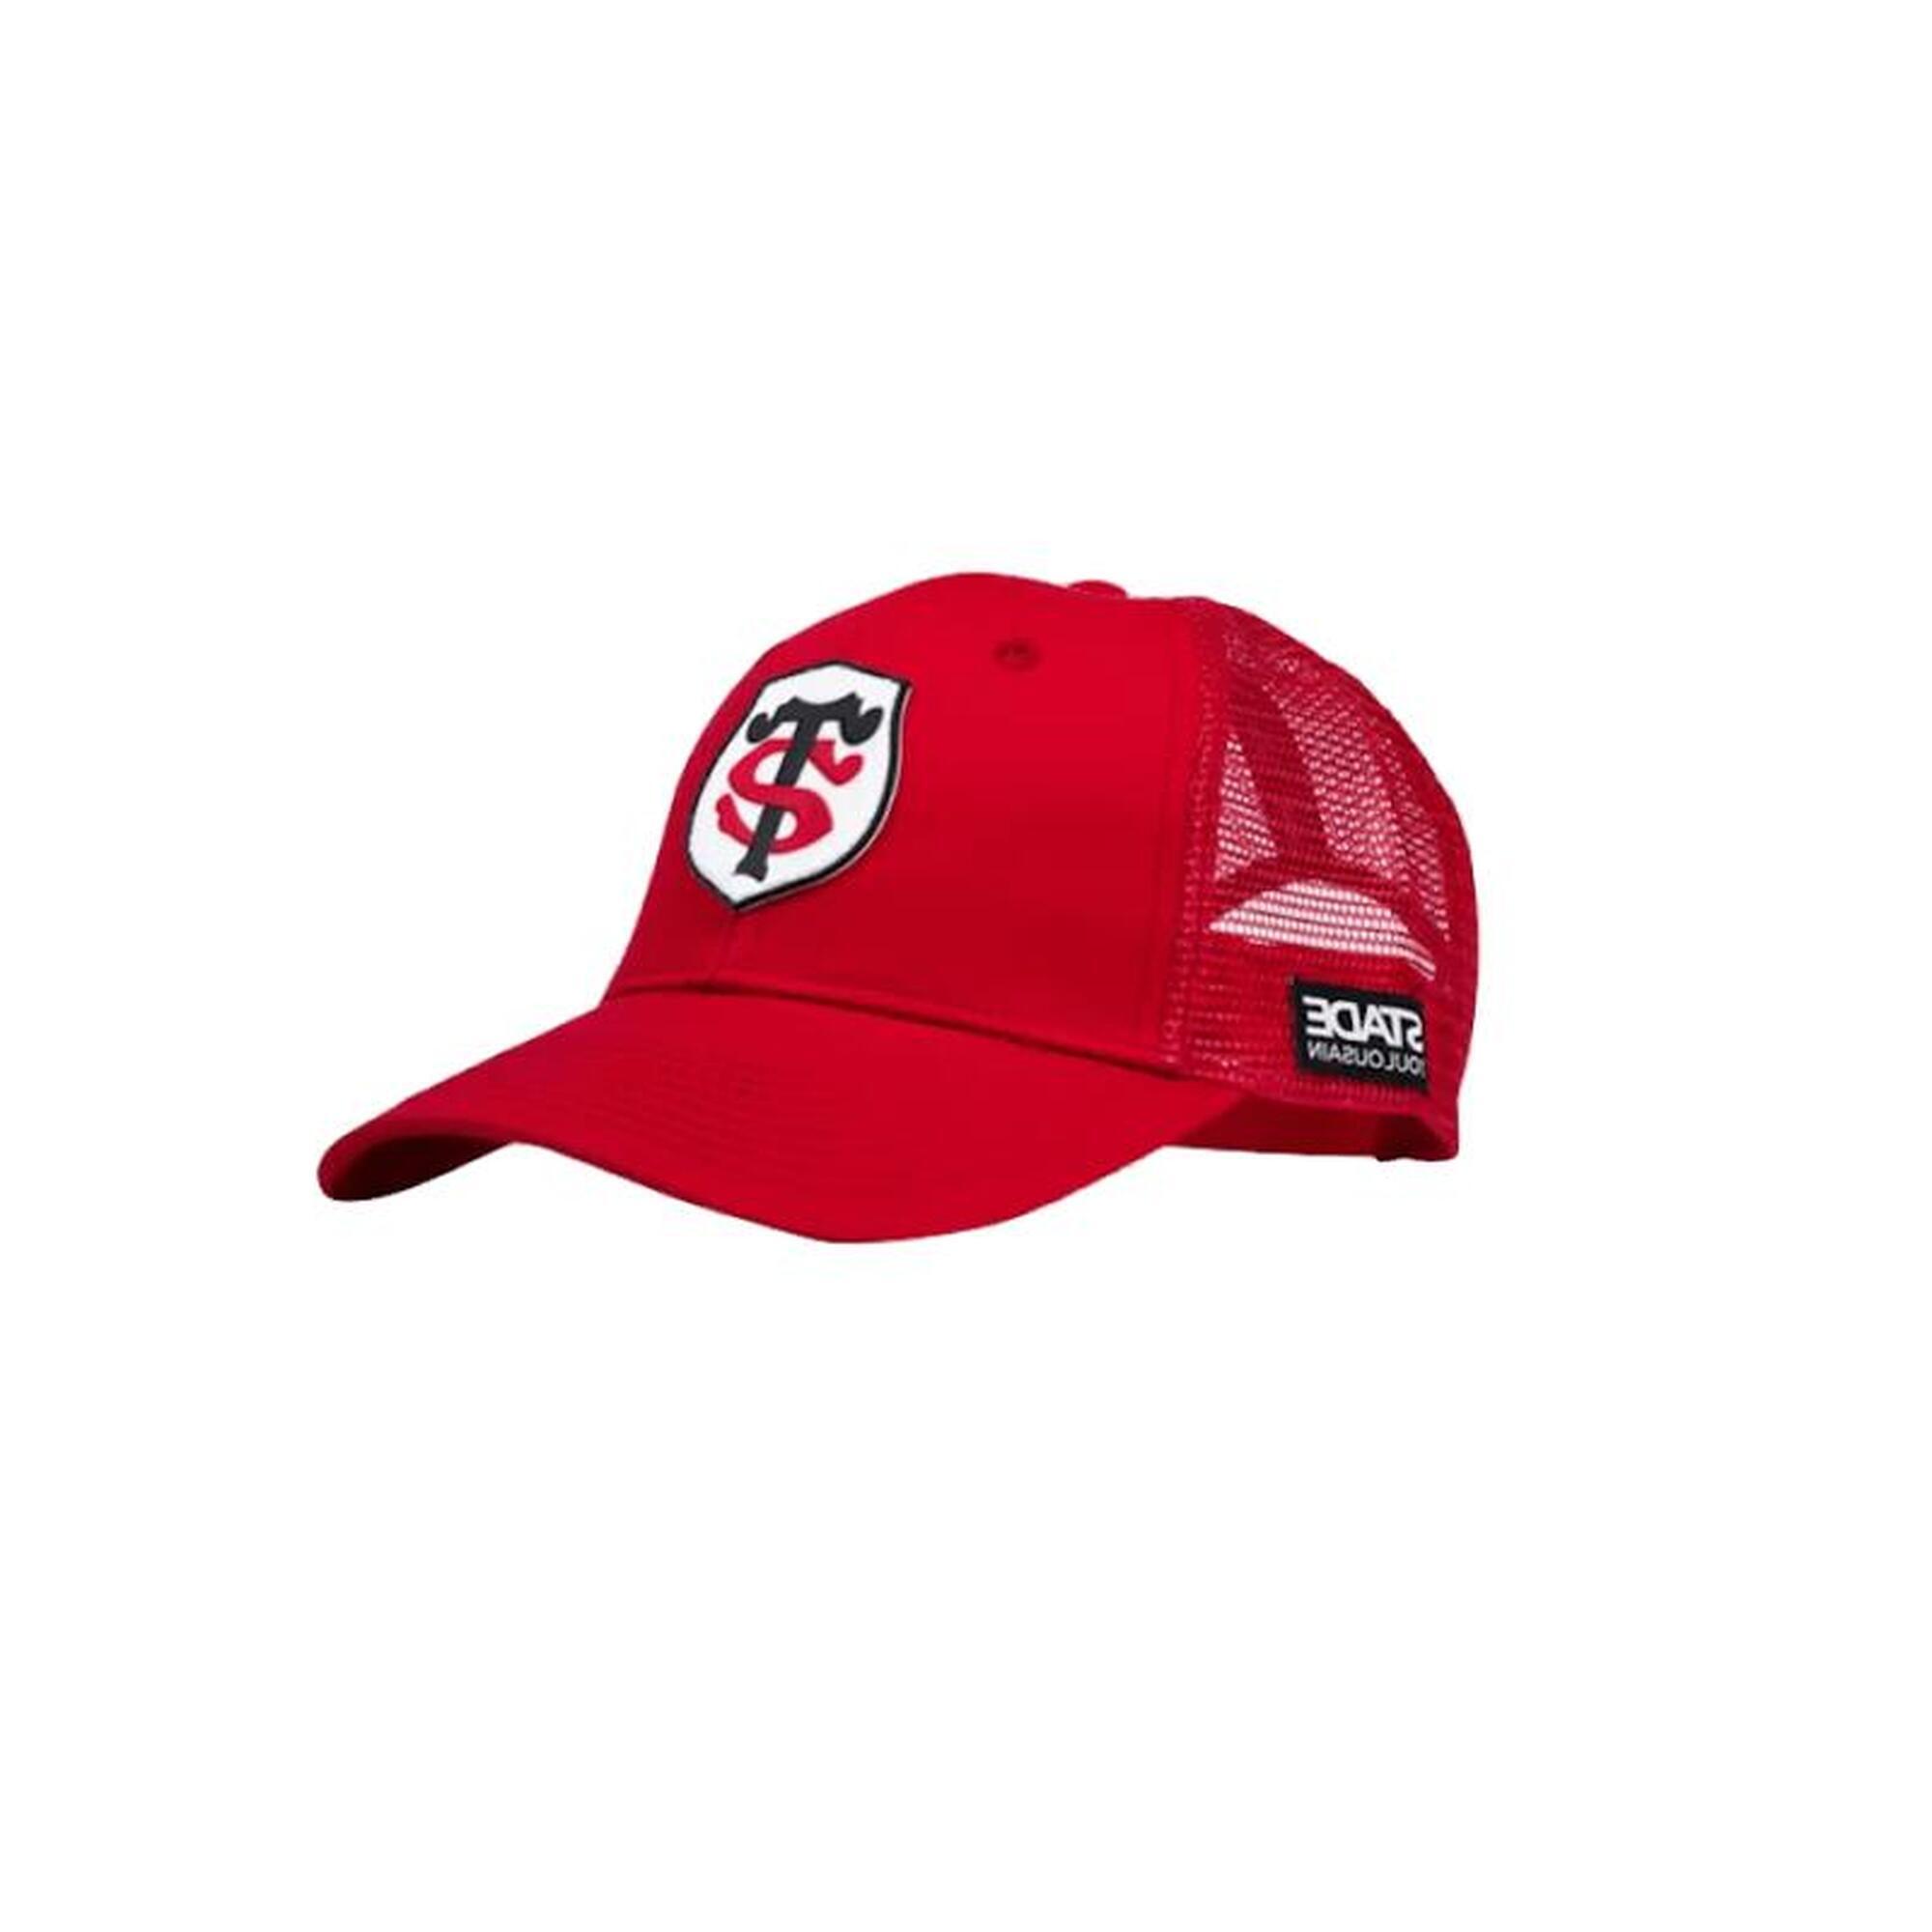 CASQUETTE TRUCKER ROUGE RUGBY - STADE TOULOUSAIN